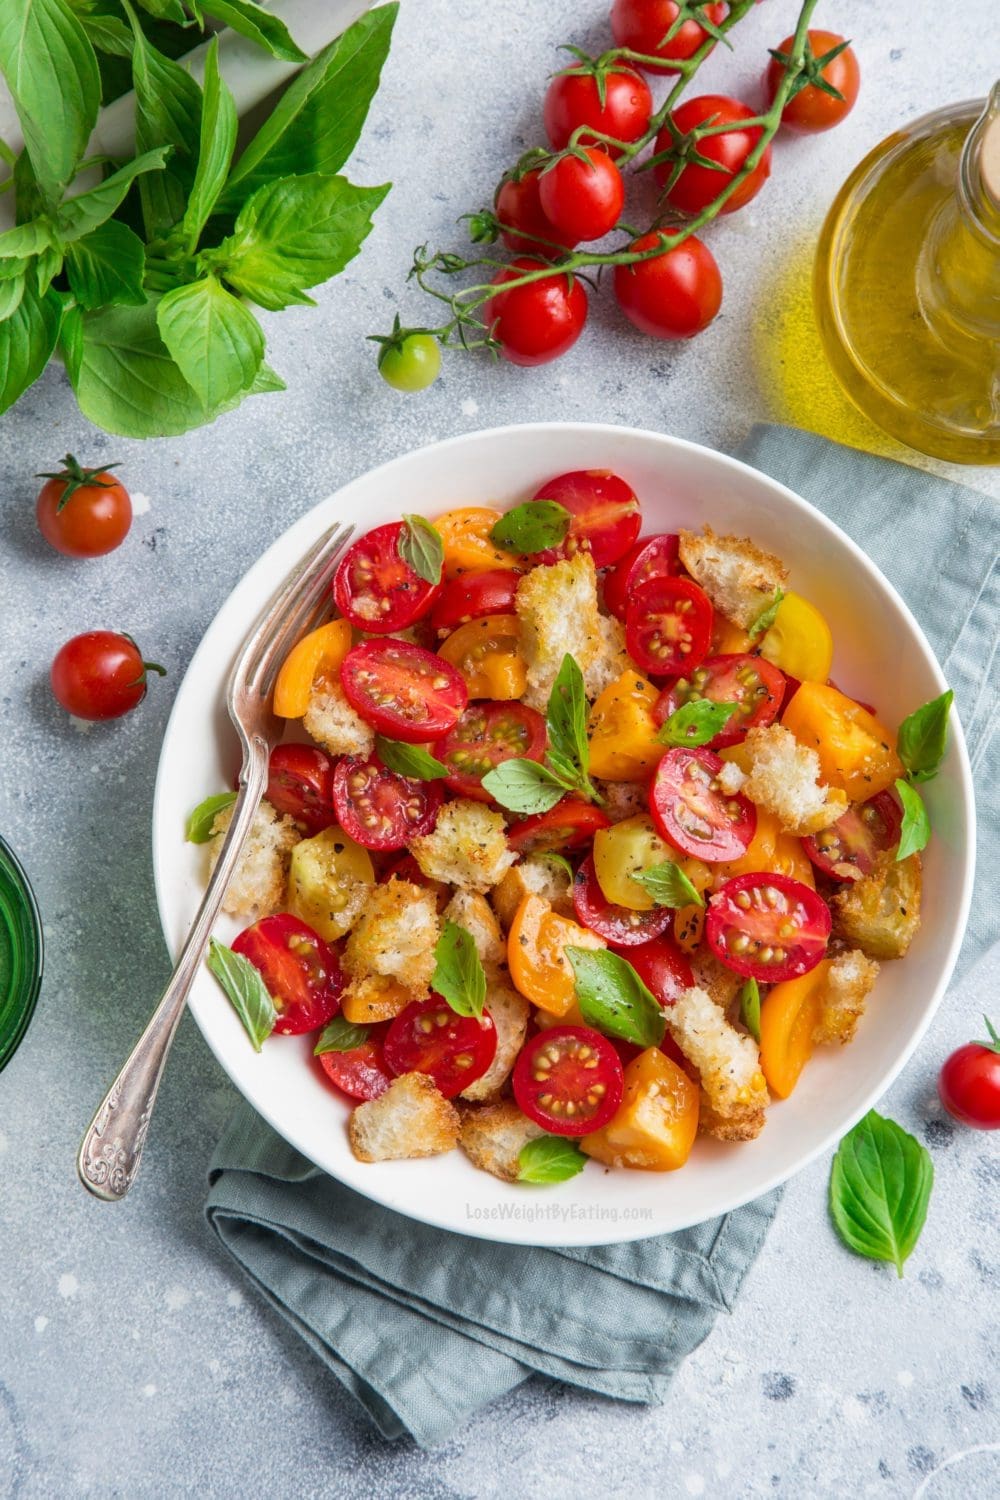 Panzanella Tomato Salad Recipe The Best Healthy Side Dishes for Chicken